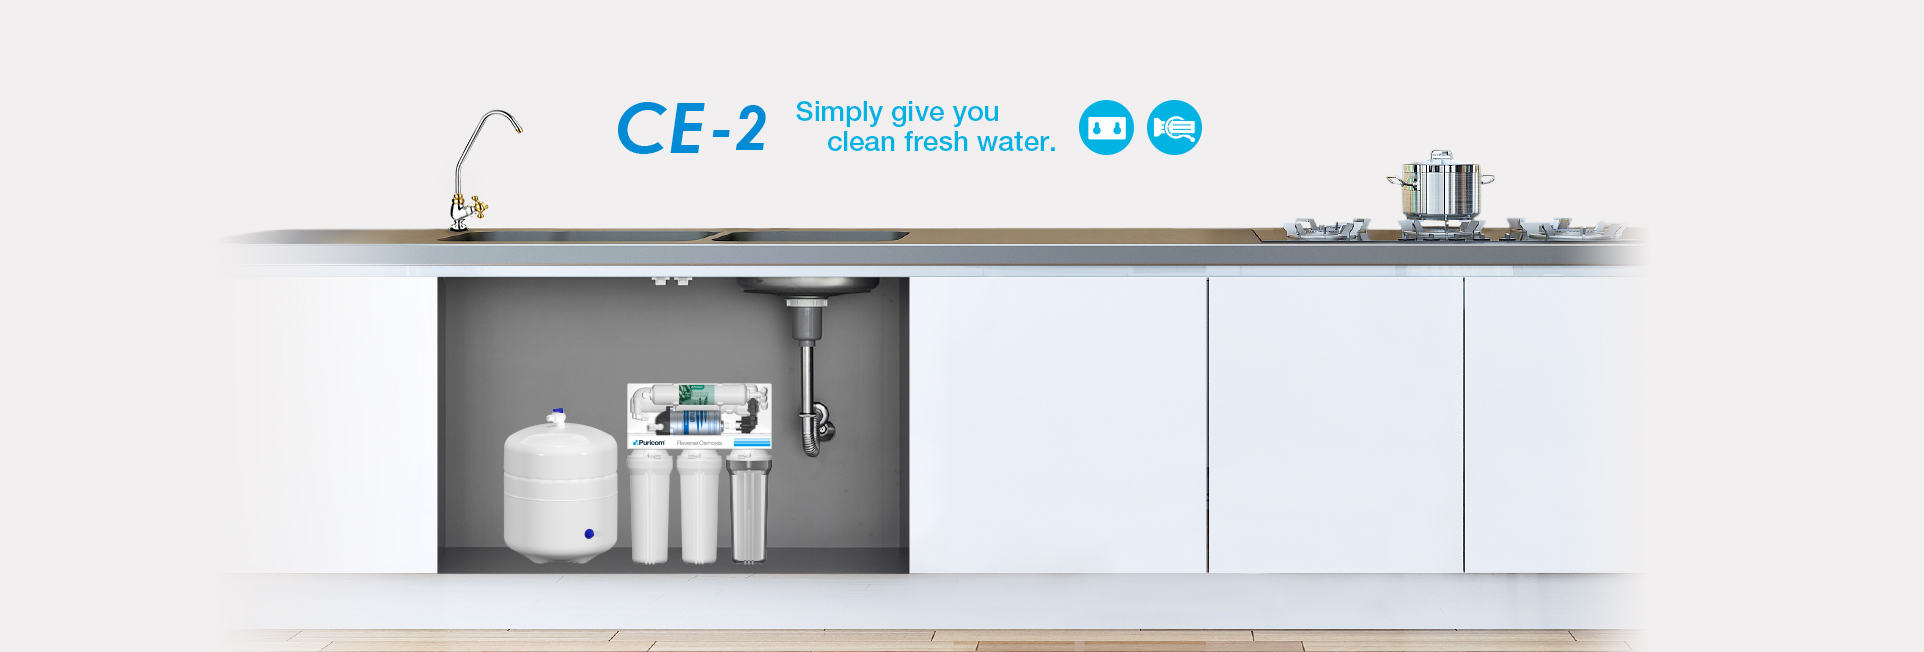 CE-2 Traditional Reverse Osmosis Drinking Water System  - Puricom